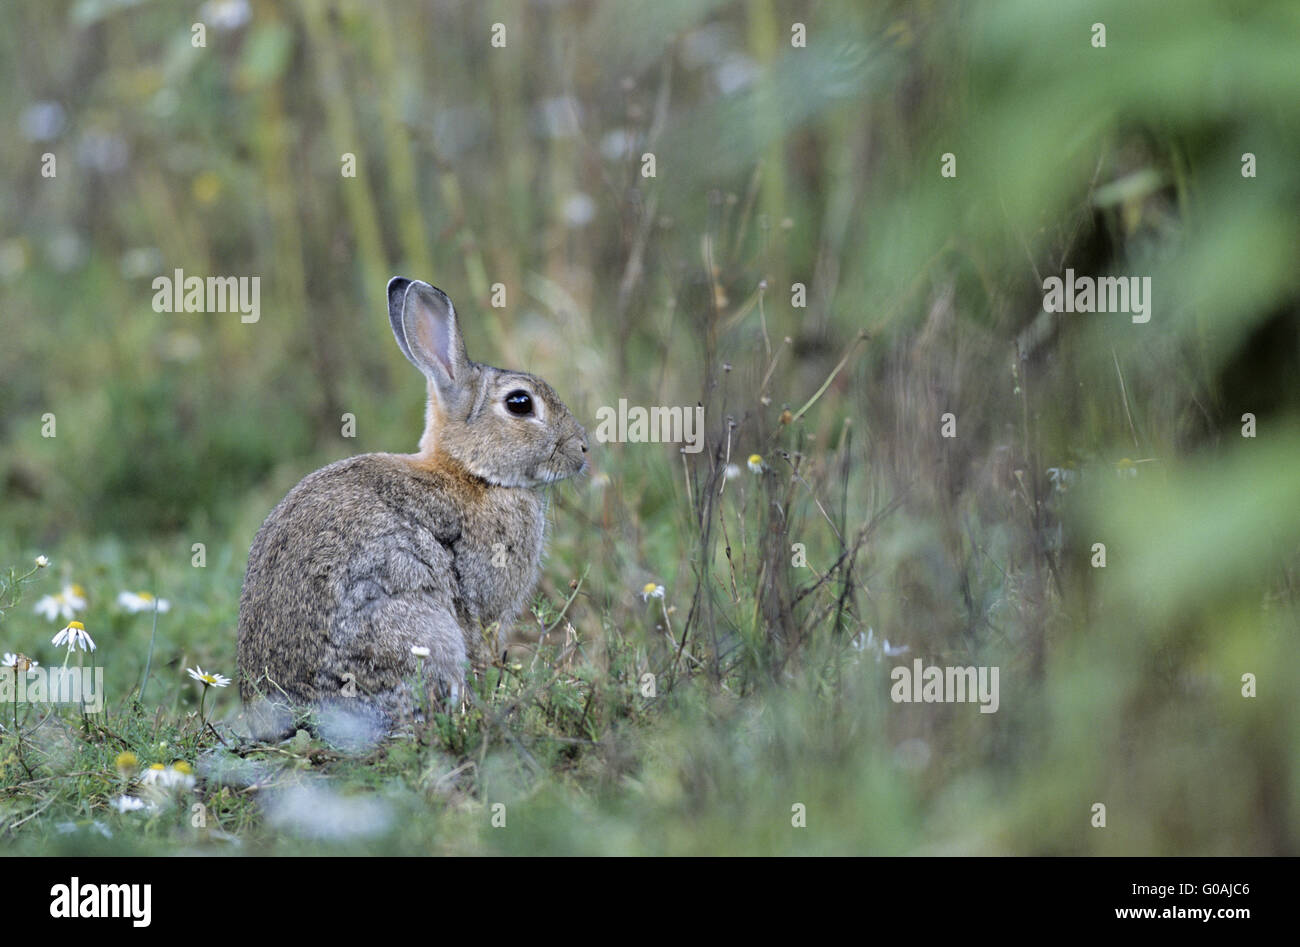 European Rabbit sitting in a forest meadow Stock Photo